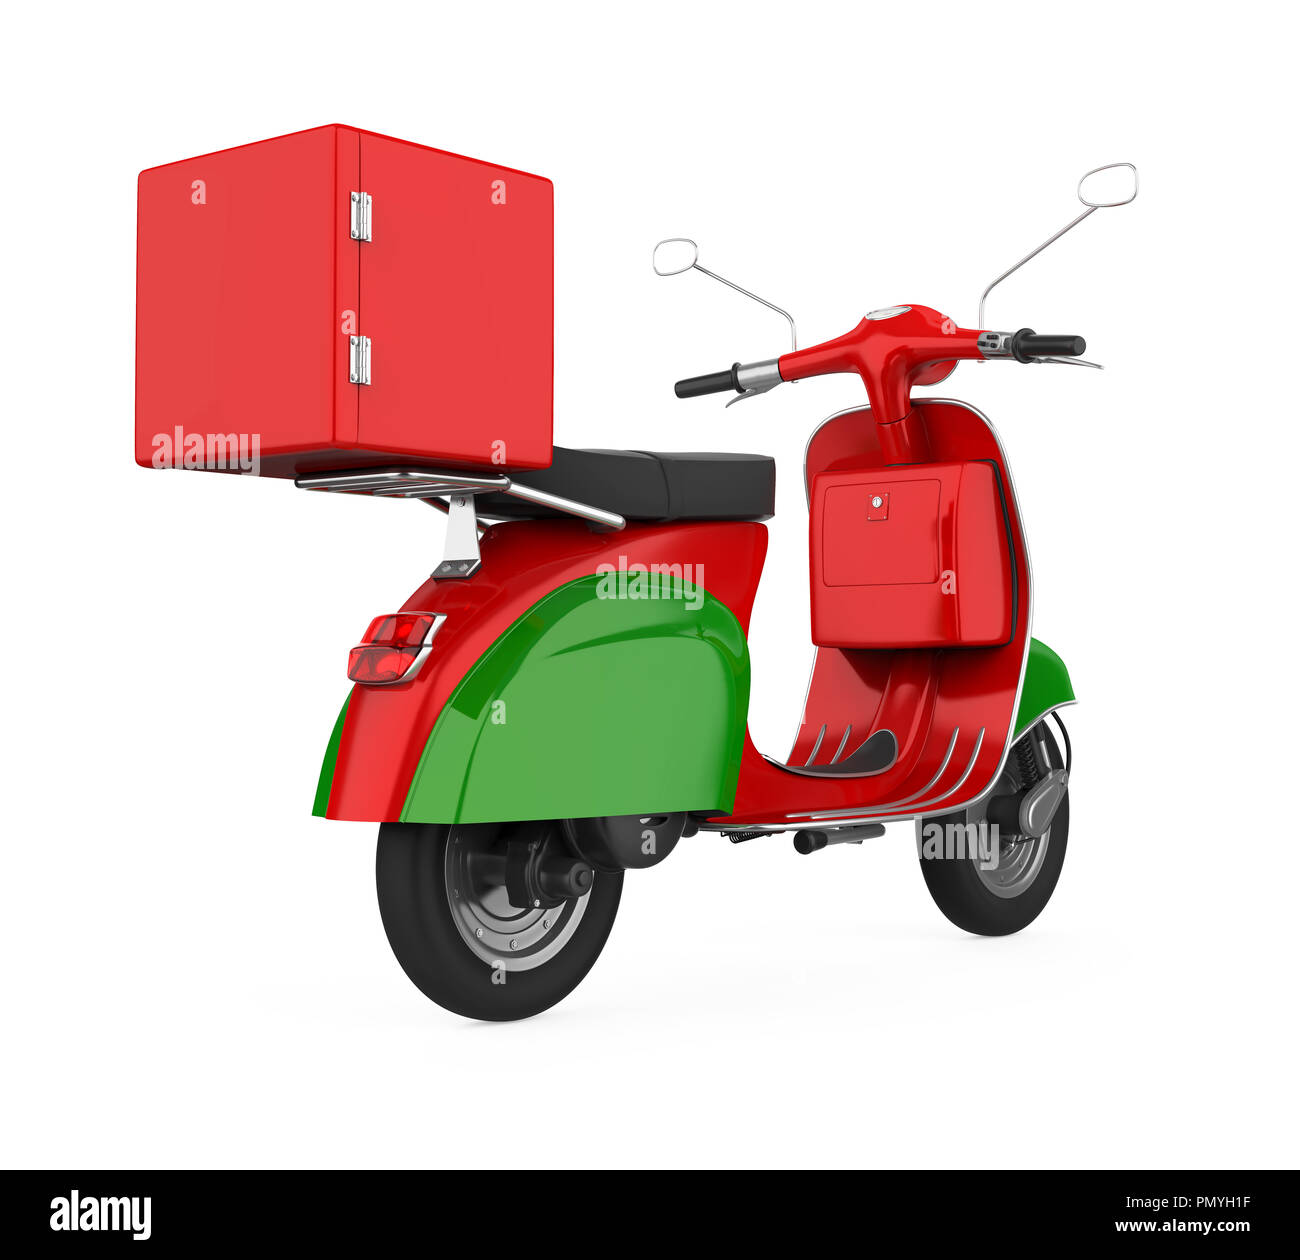 Download Motorcycle Delivery Box Mockup - Free Download Mockup